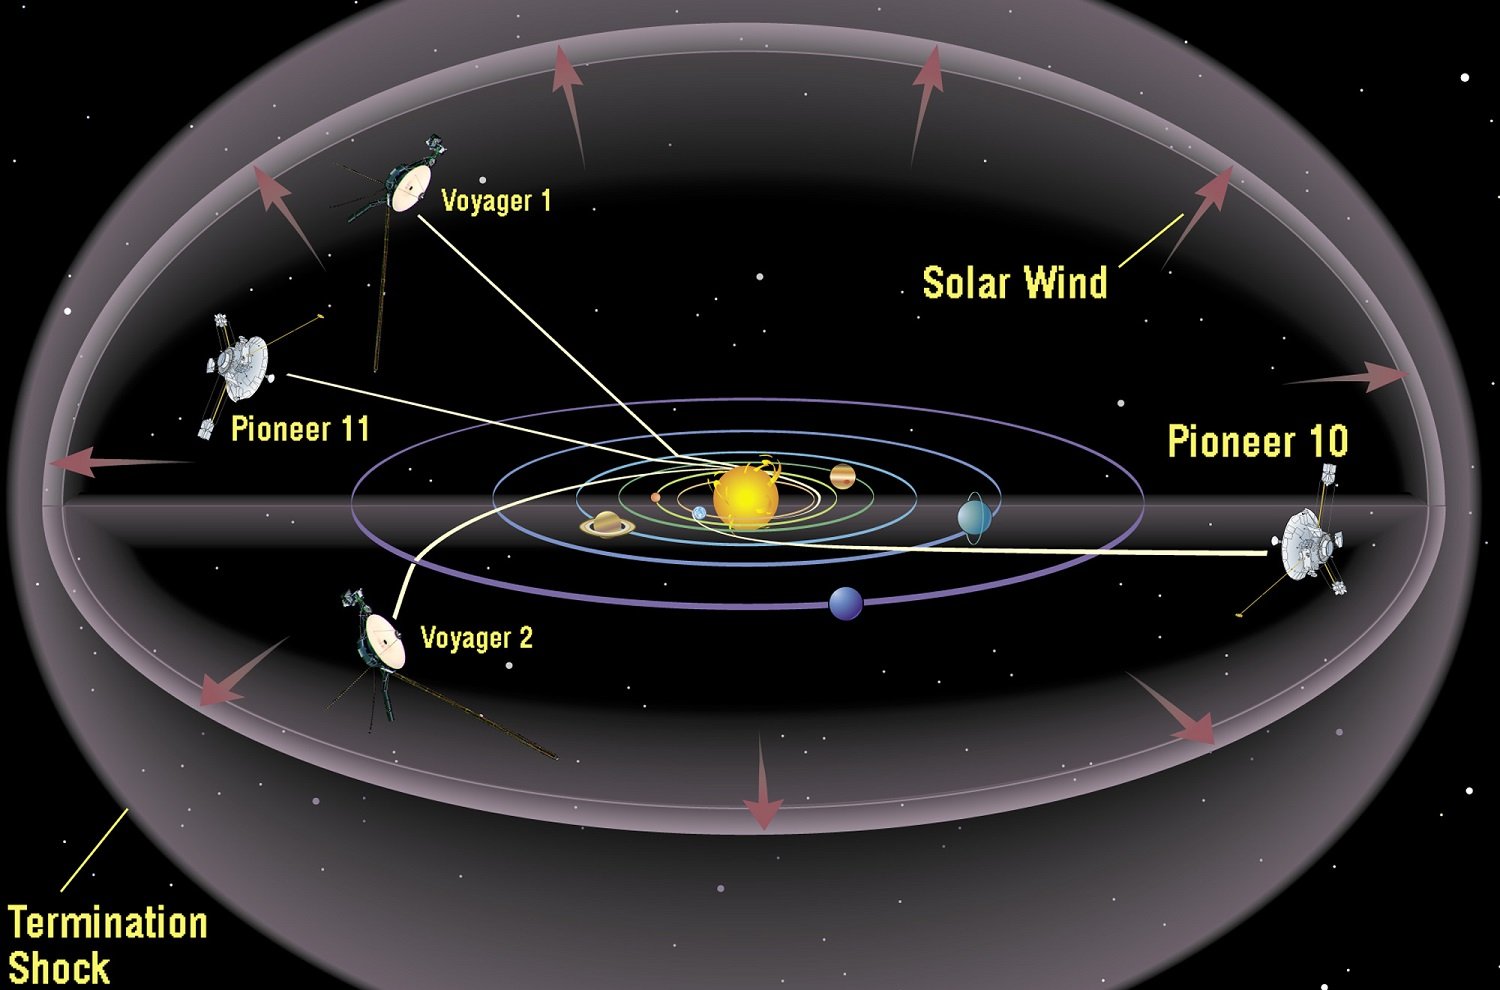 the difference between voyager 1 and 2